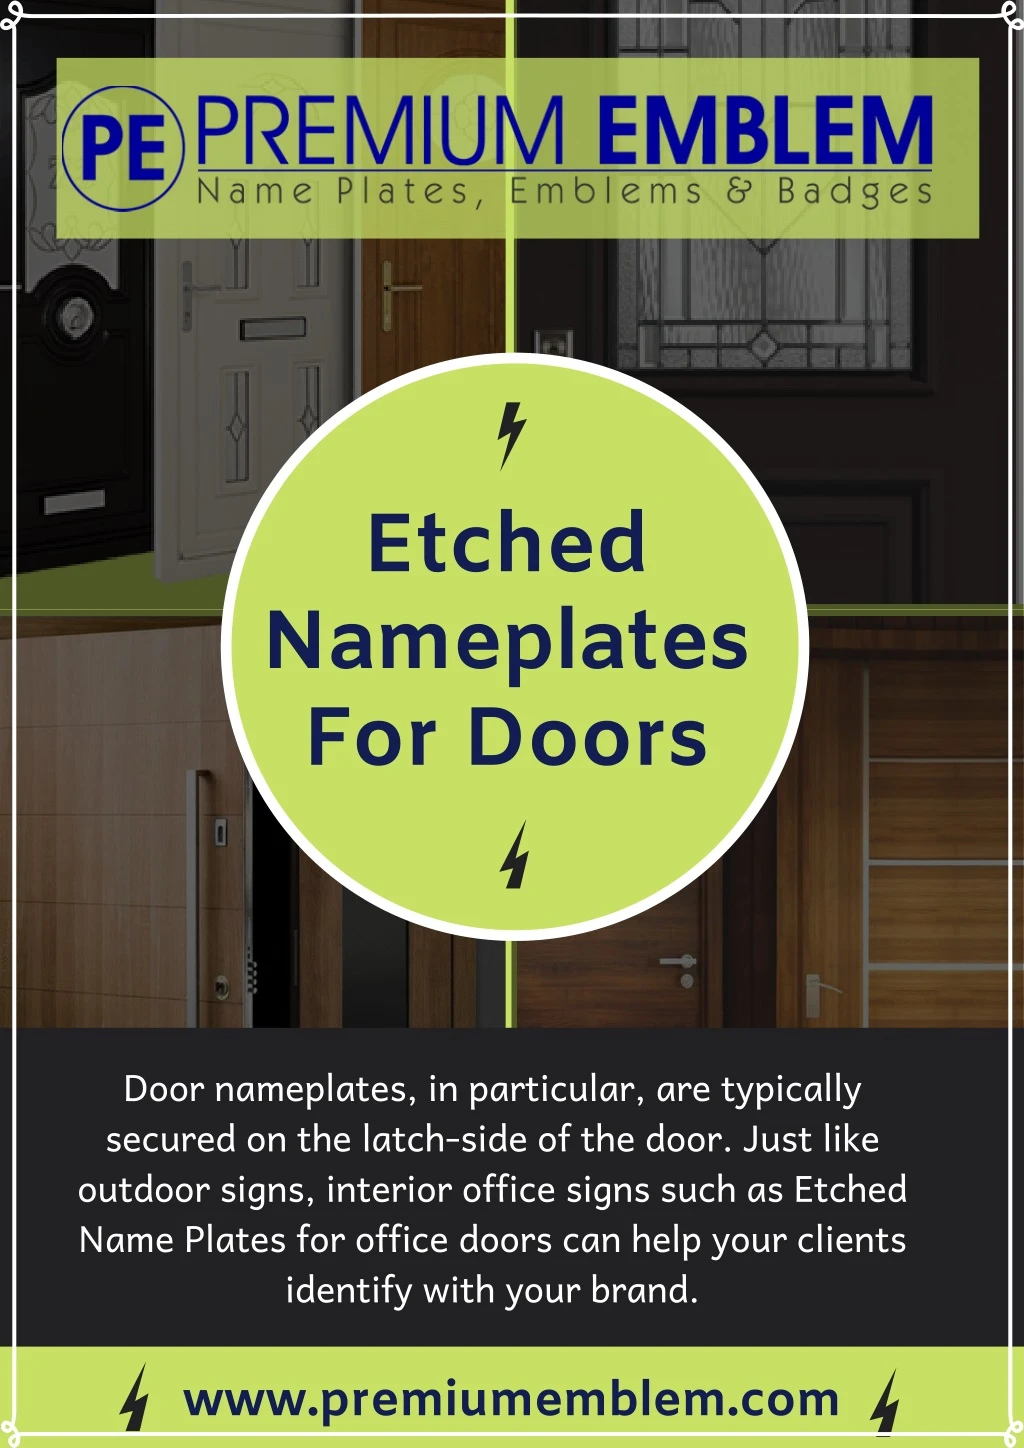 etched nameplates for doors